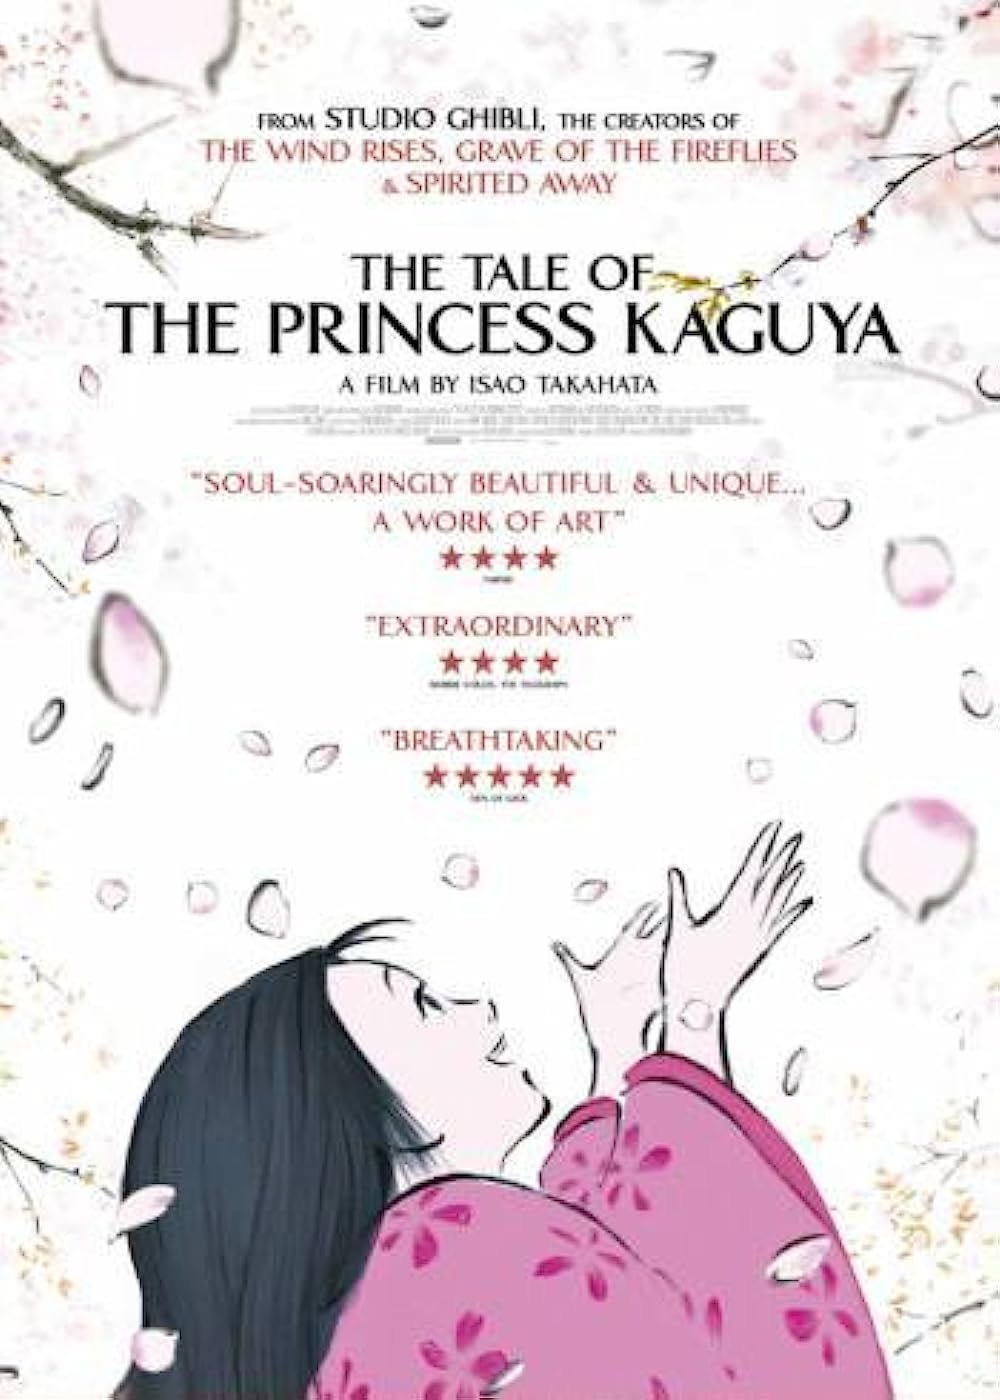 Watch The Tale of the Princess Kaguya today, it's one of the best Studio Ghibli movies. Recommended for 9+ year olds.